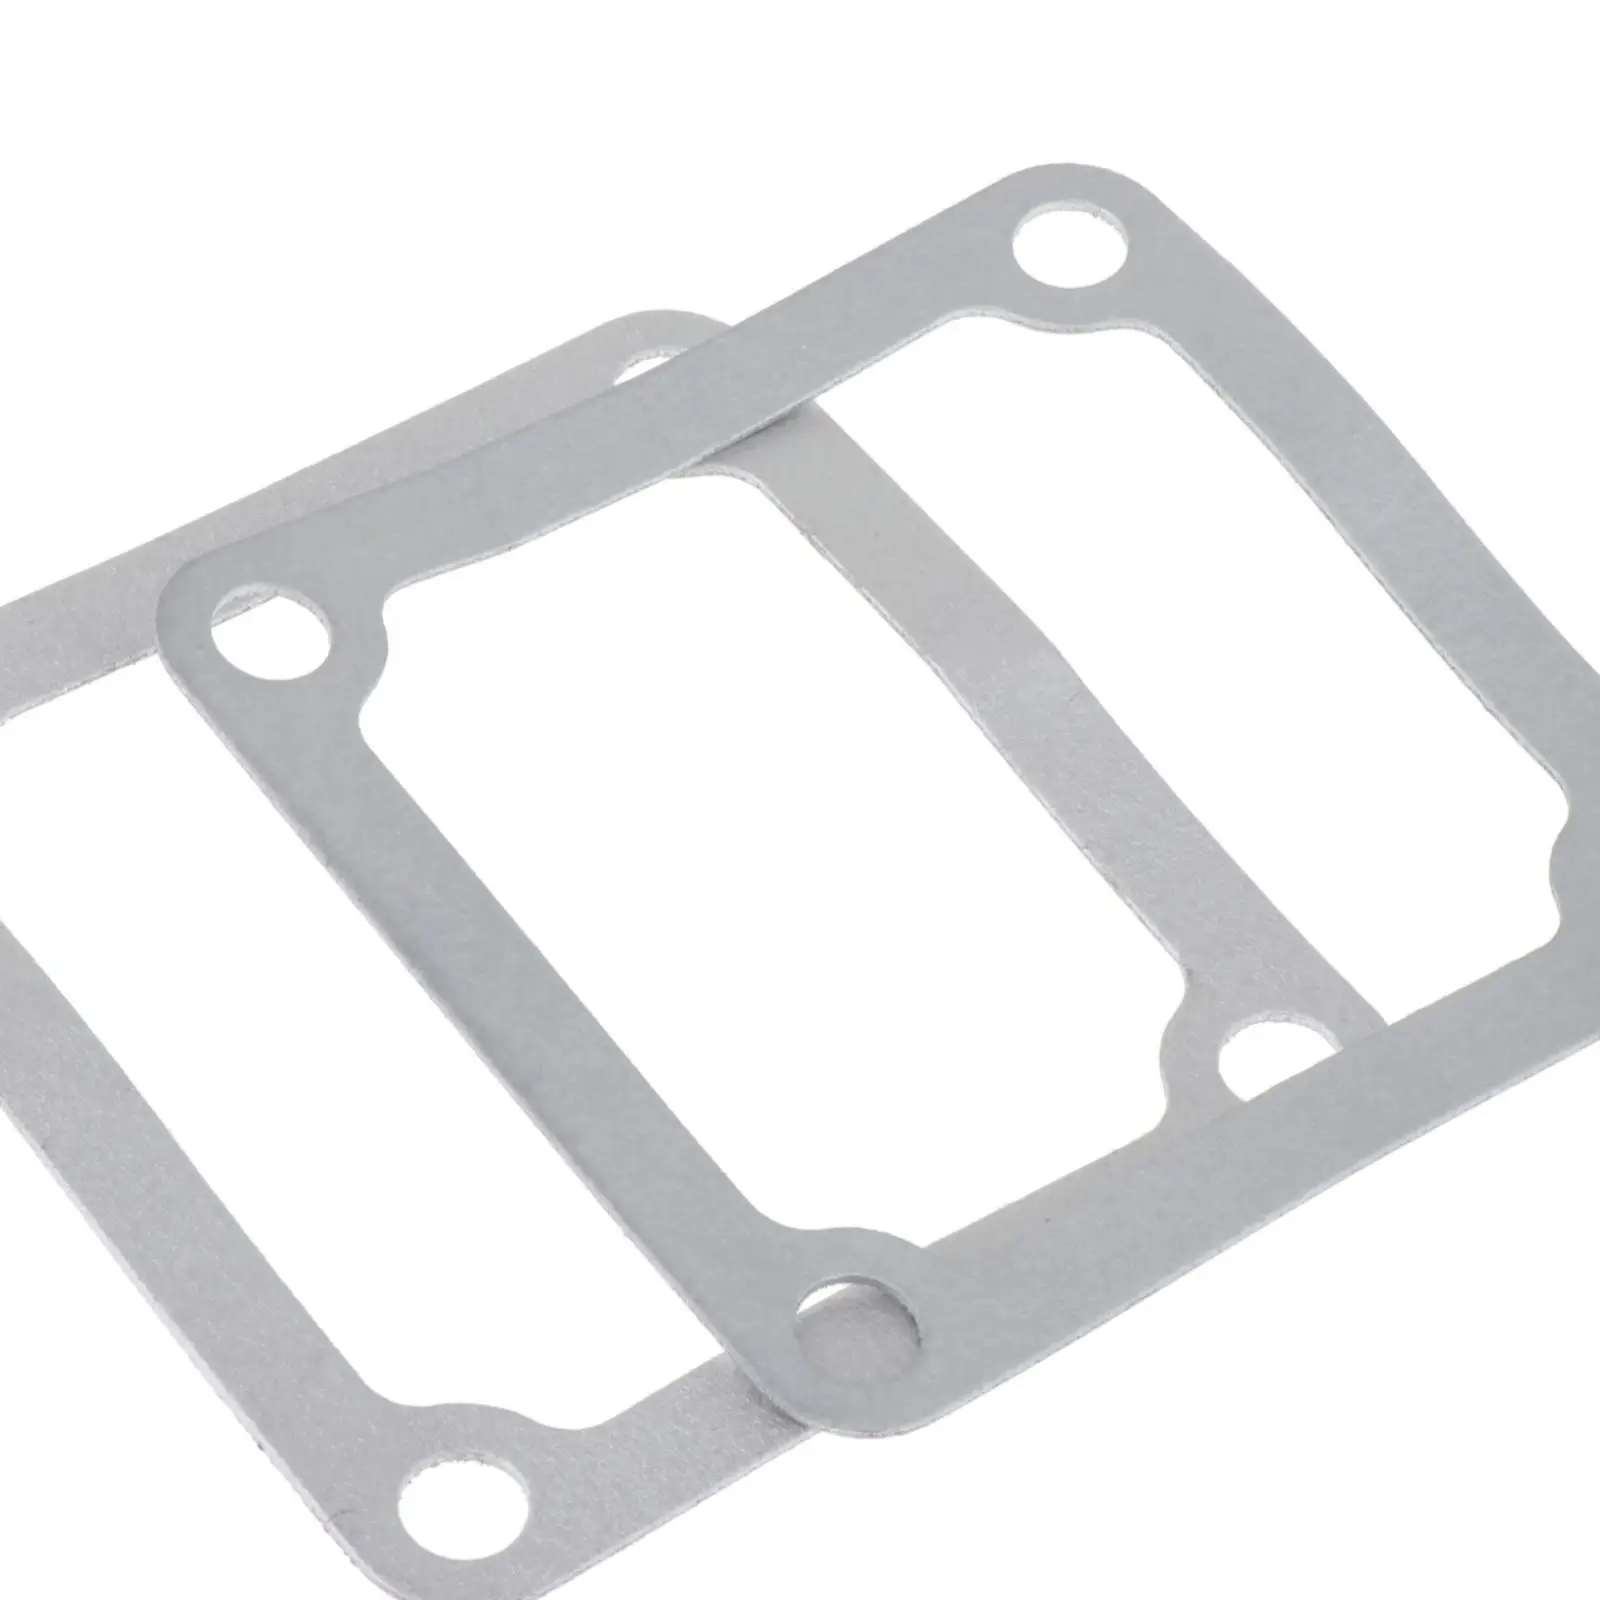 2x Intake Heater Grid Gaskets 93x98mm 12V, 24V Leakproof Spare Replacement